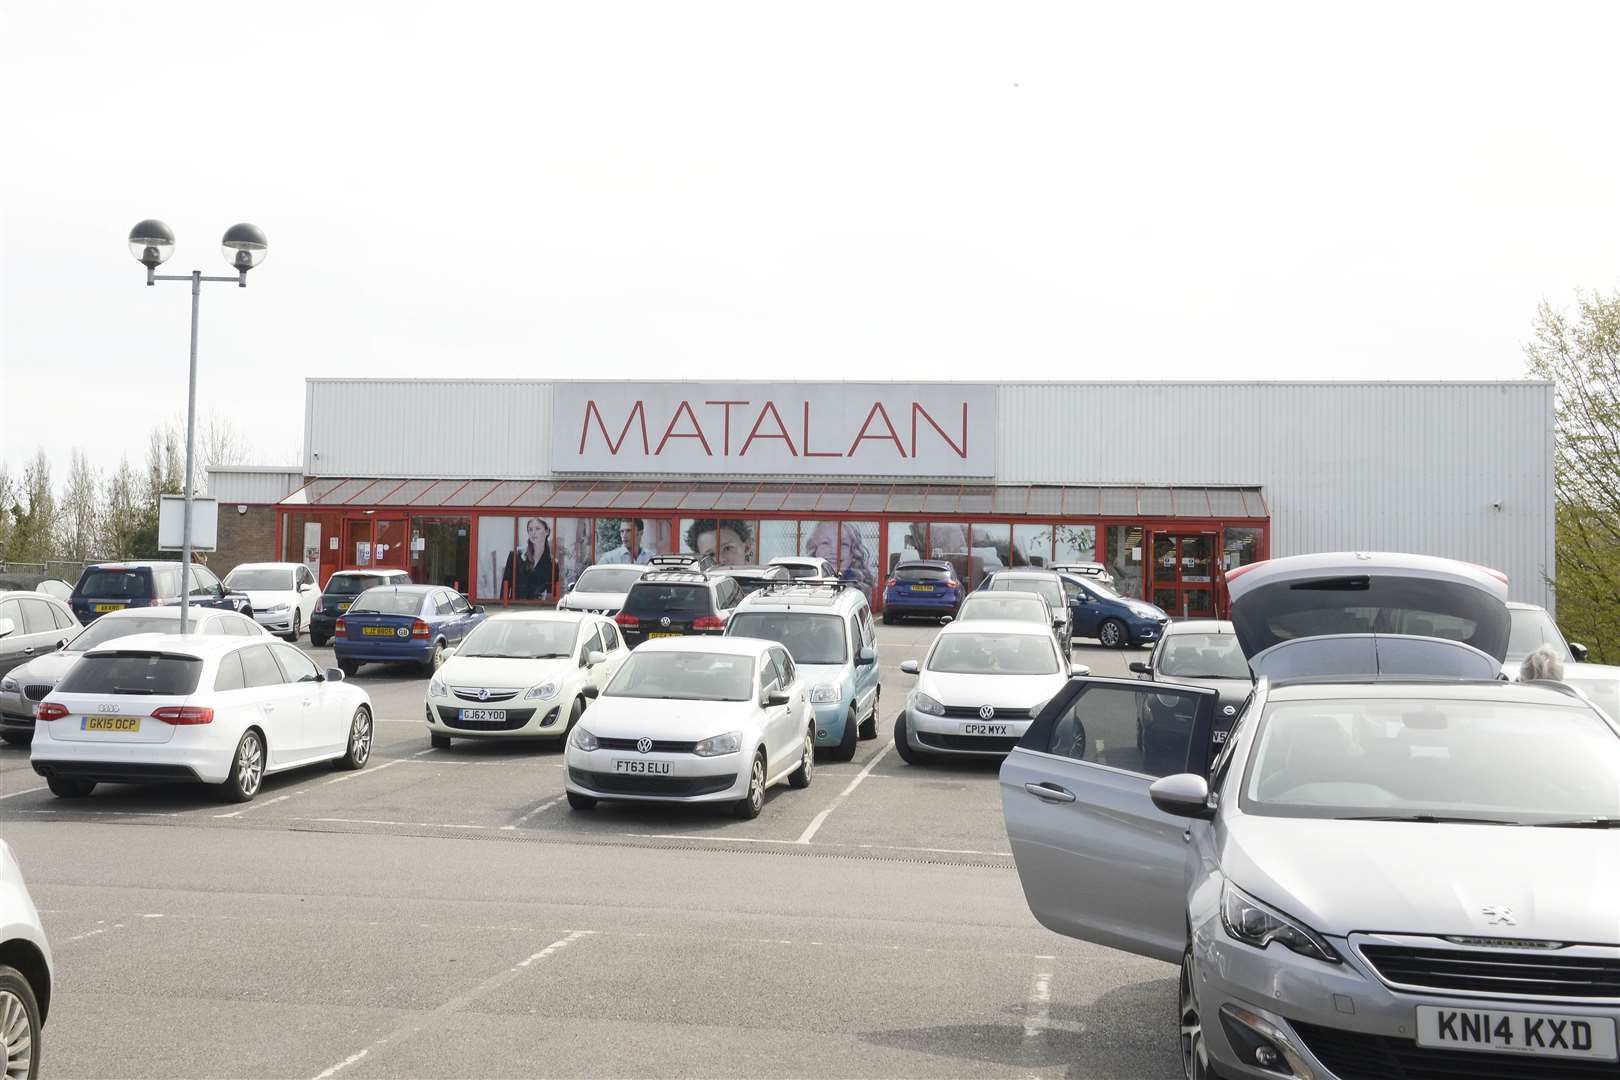 The Matalan store in Brookfield Road is set to be snapped up by Ashford Borough Council